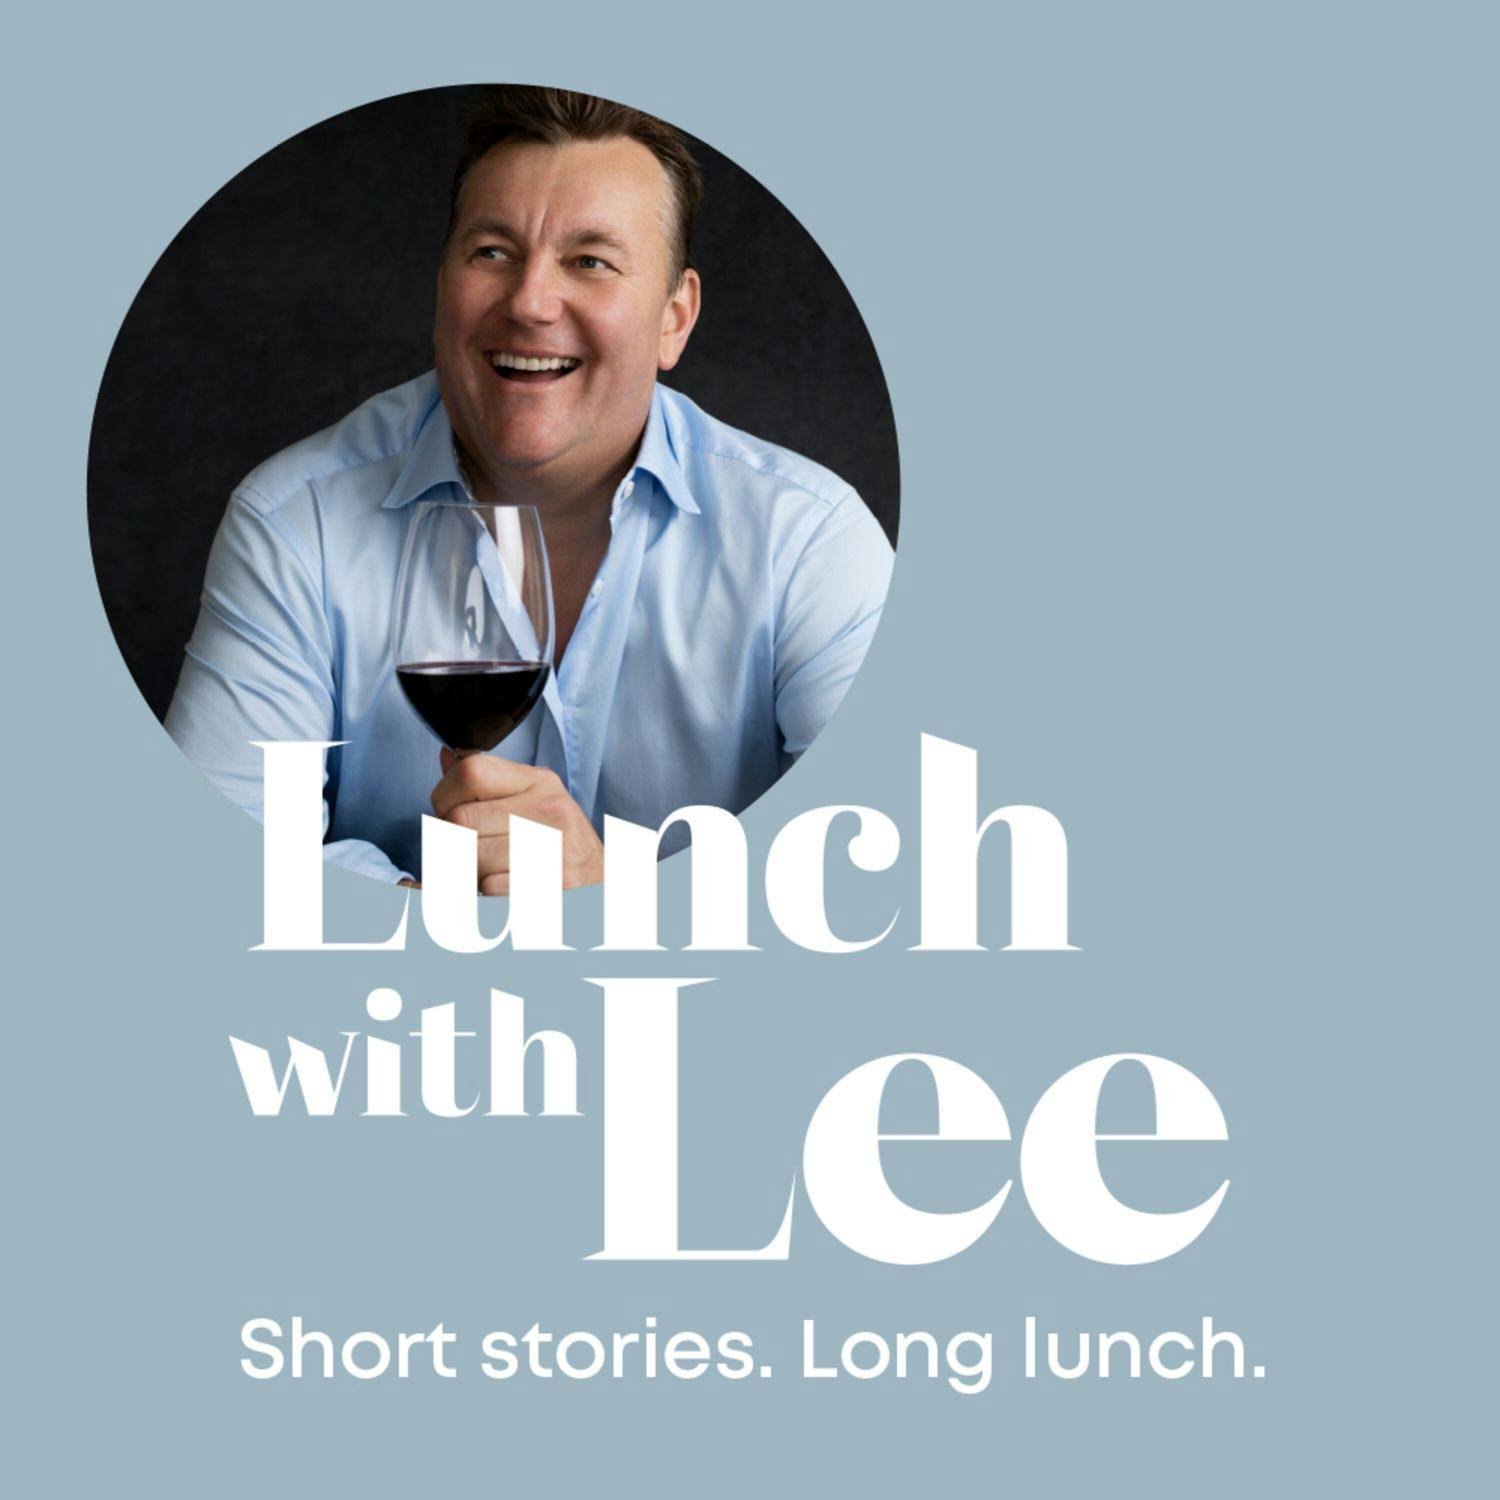 Lunch with lee LIVE with Lenny Pascoe, Richard Chee Quee & Gavin Robertson